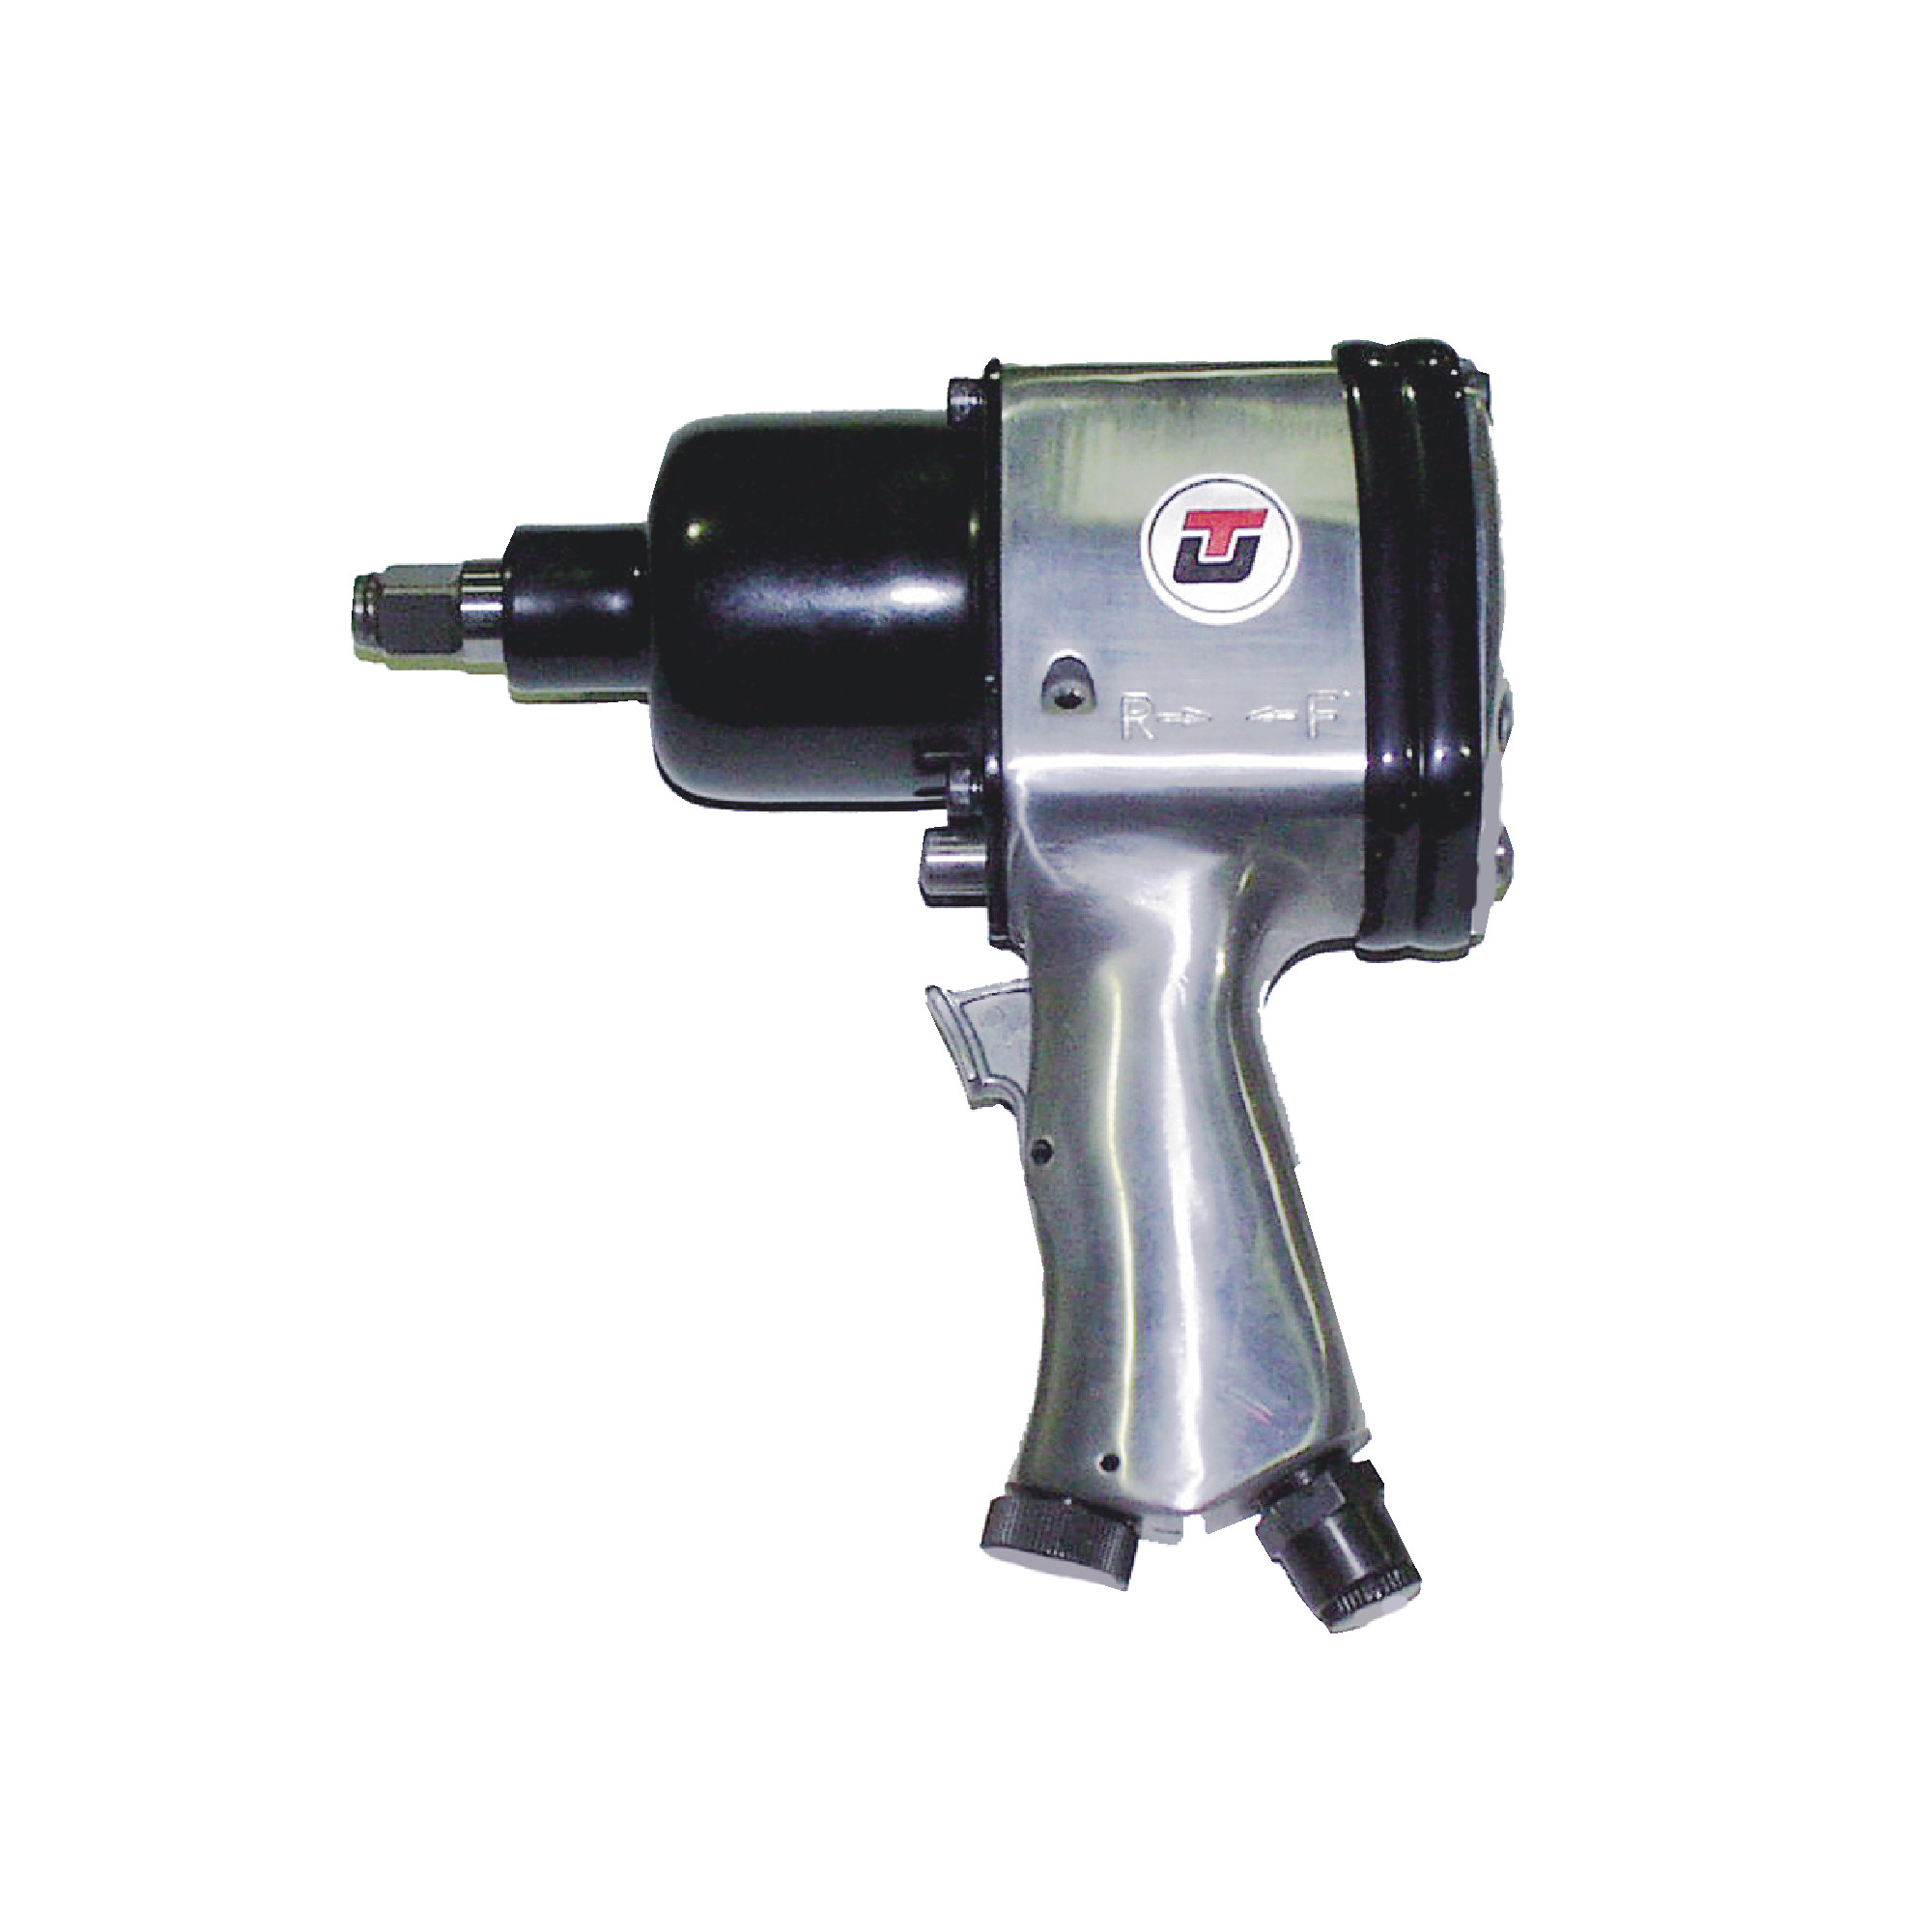 1/2" General Duty Impact Wrench